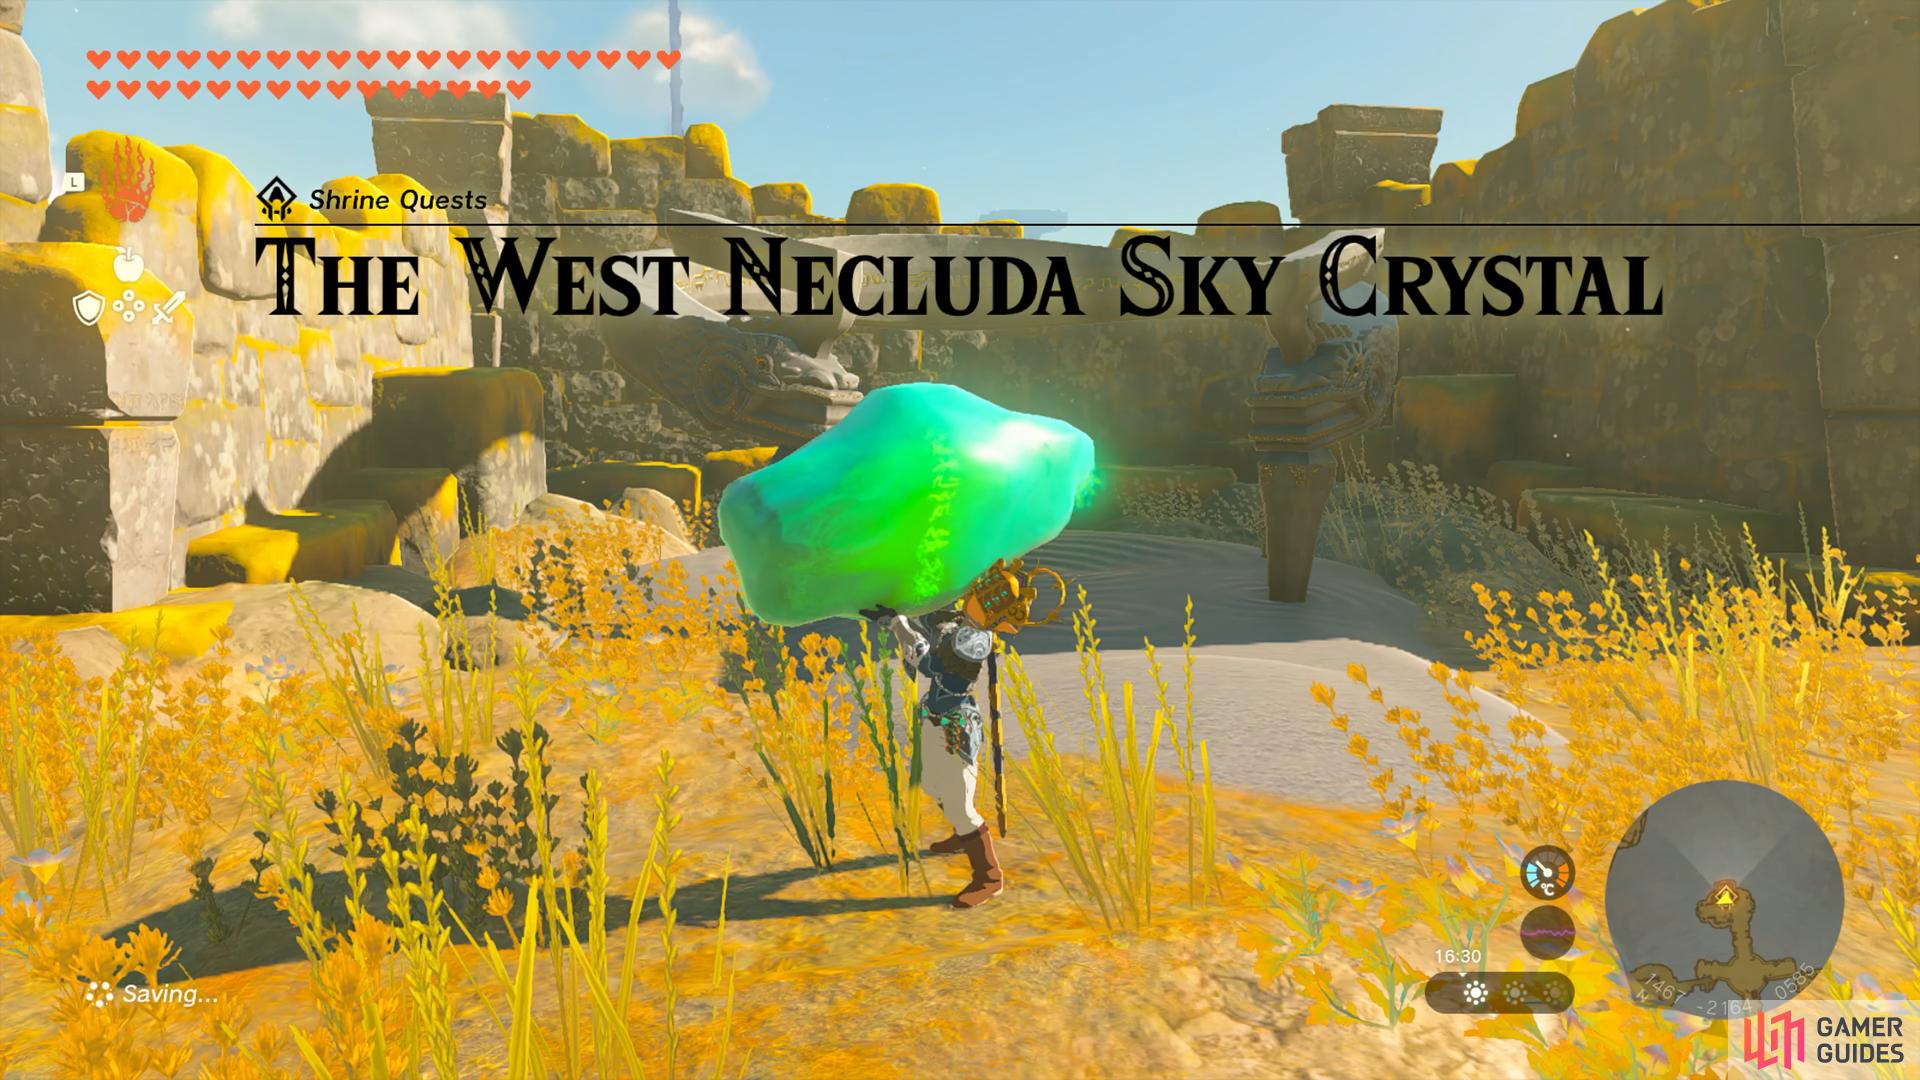 The West Necluda Sky Crystal Shrine Quest notification